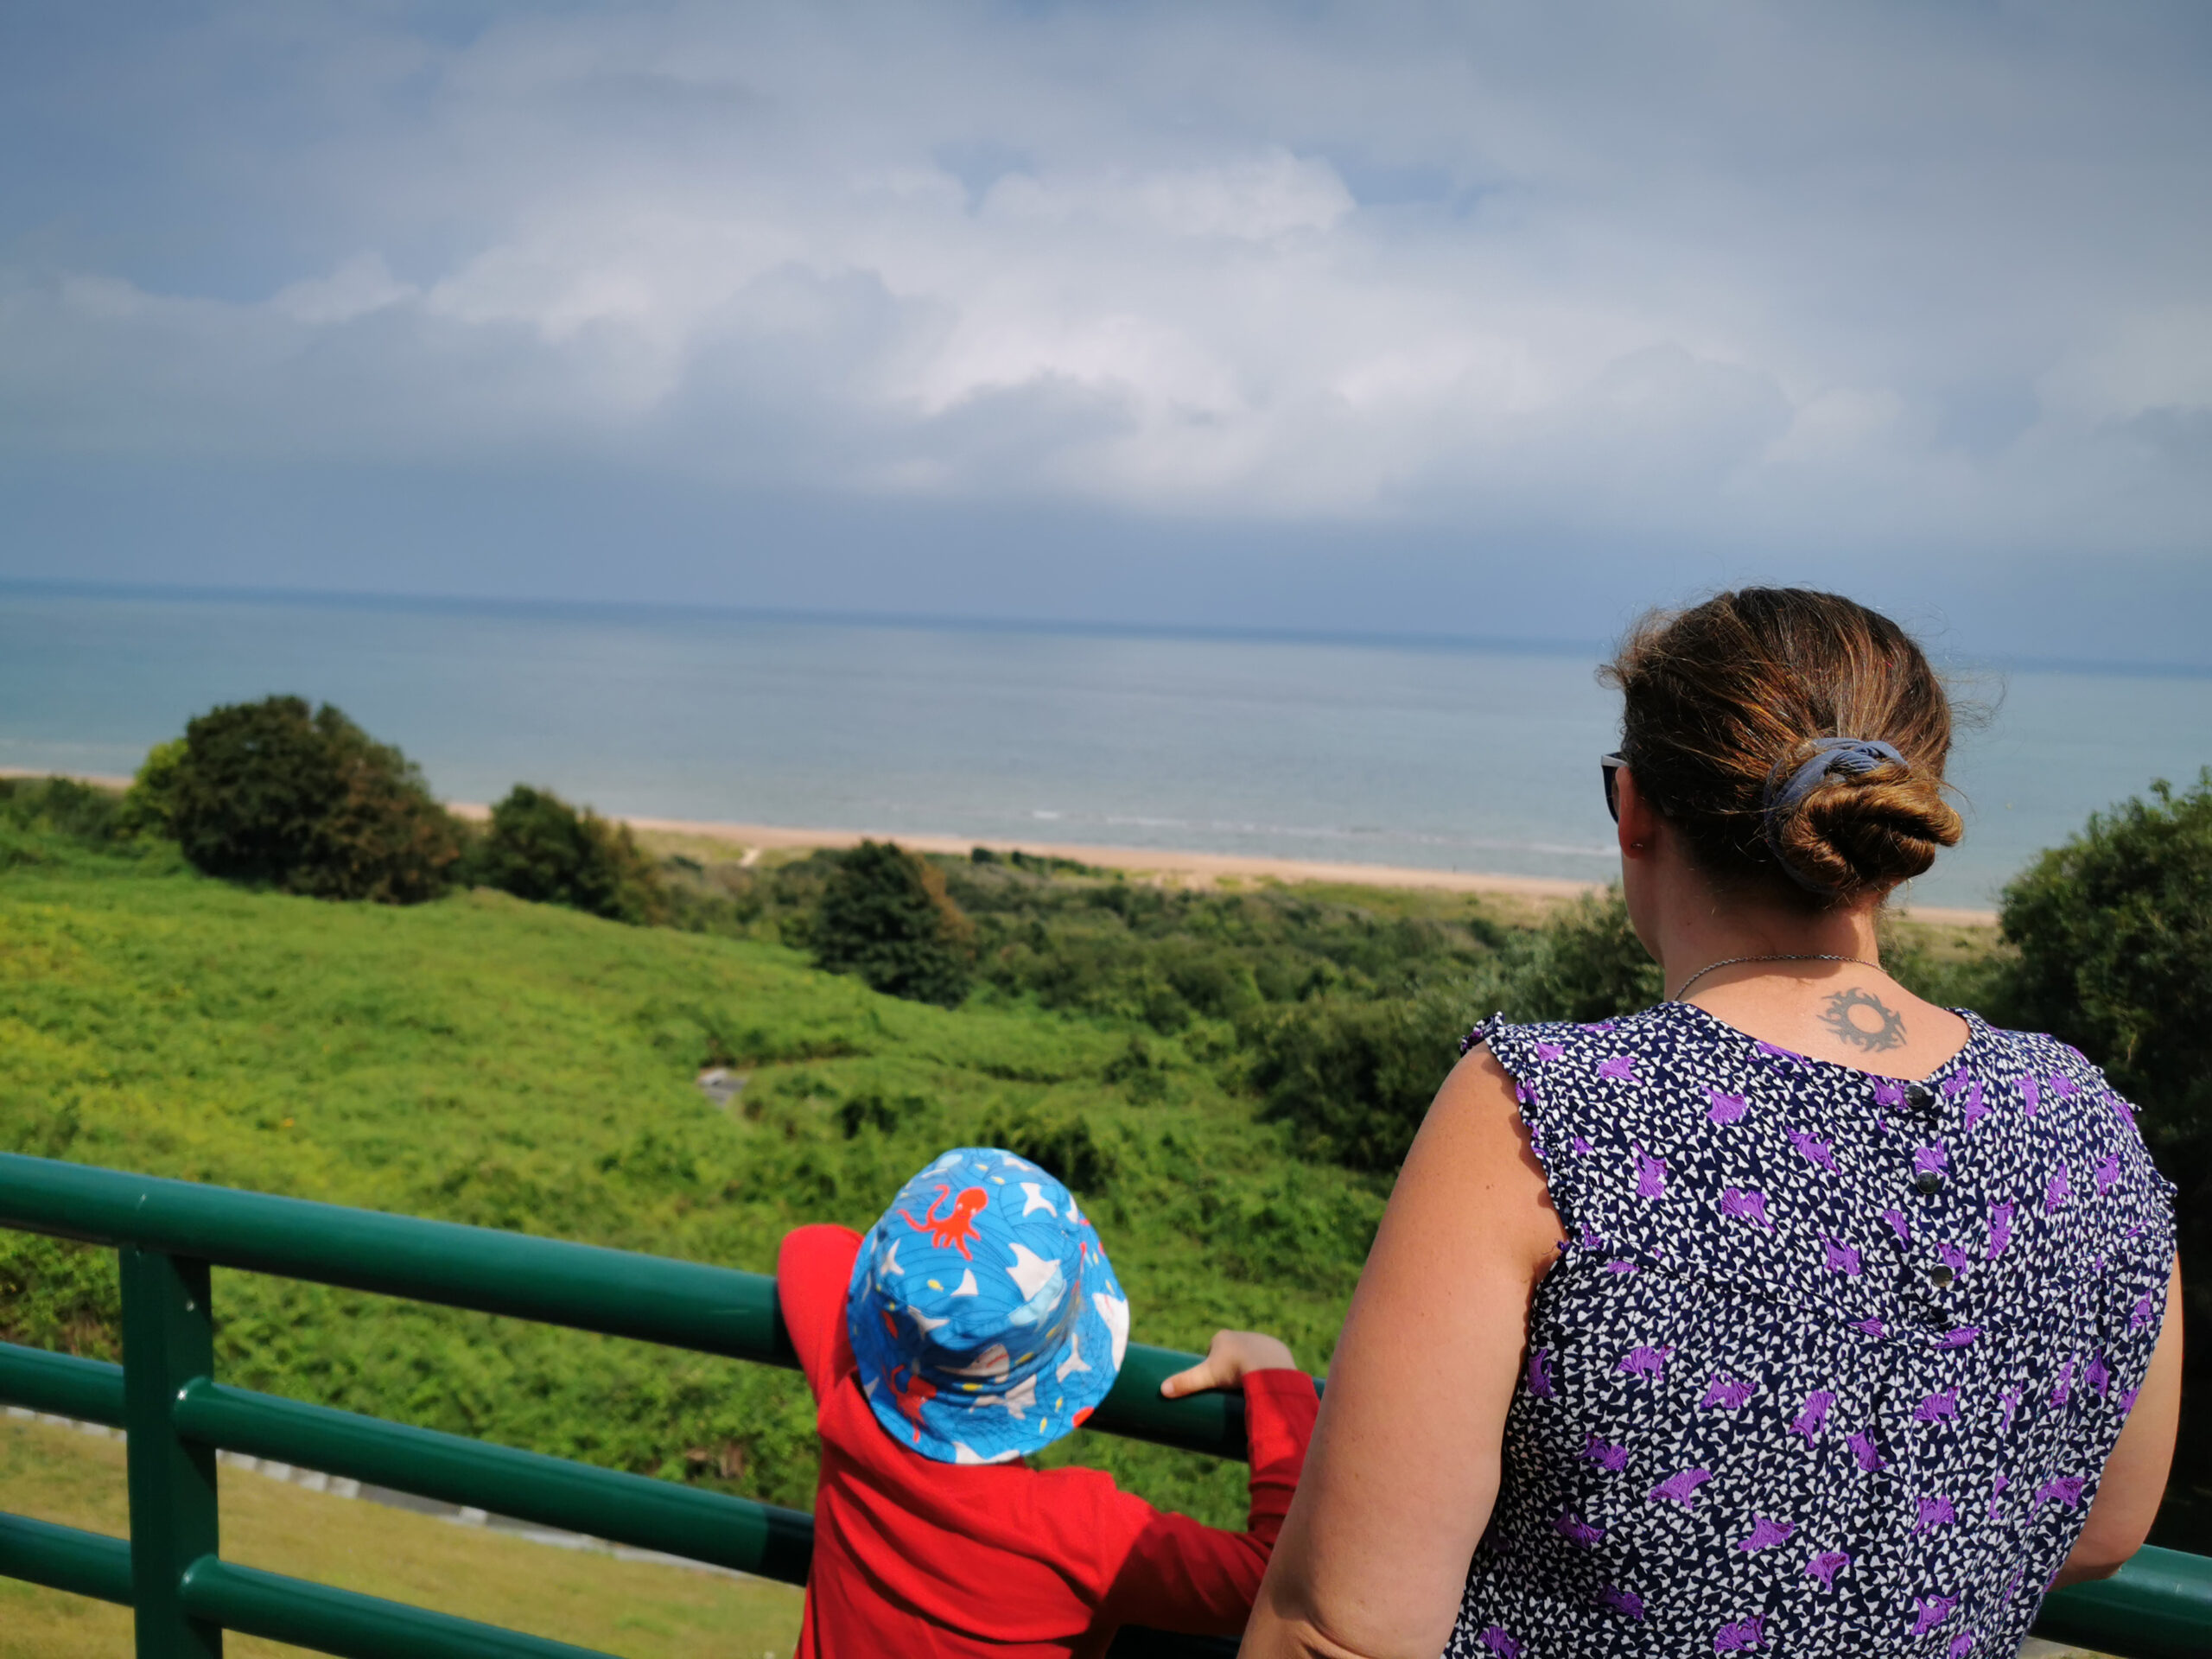 Things To Do In Normandy With Kids, Visit France, Visit Normandy, Normandy Tourism, Brittany Ferries, Family-Friendly, Family Holidays, Activities to Do, The Frenchie Mummy, Travel Blog, Family Travel, Cherbourg, French Beaches, WWII, Omaha Beach